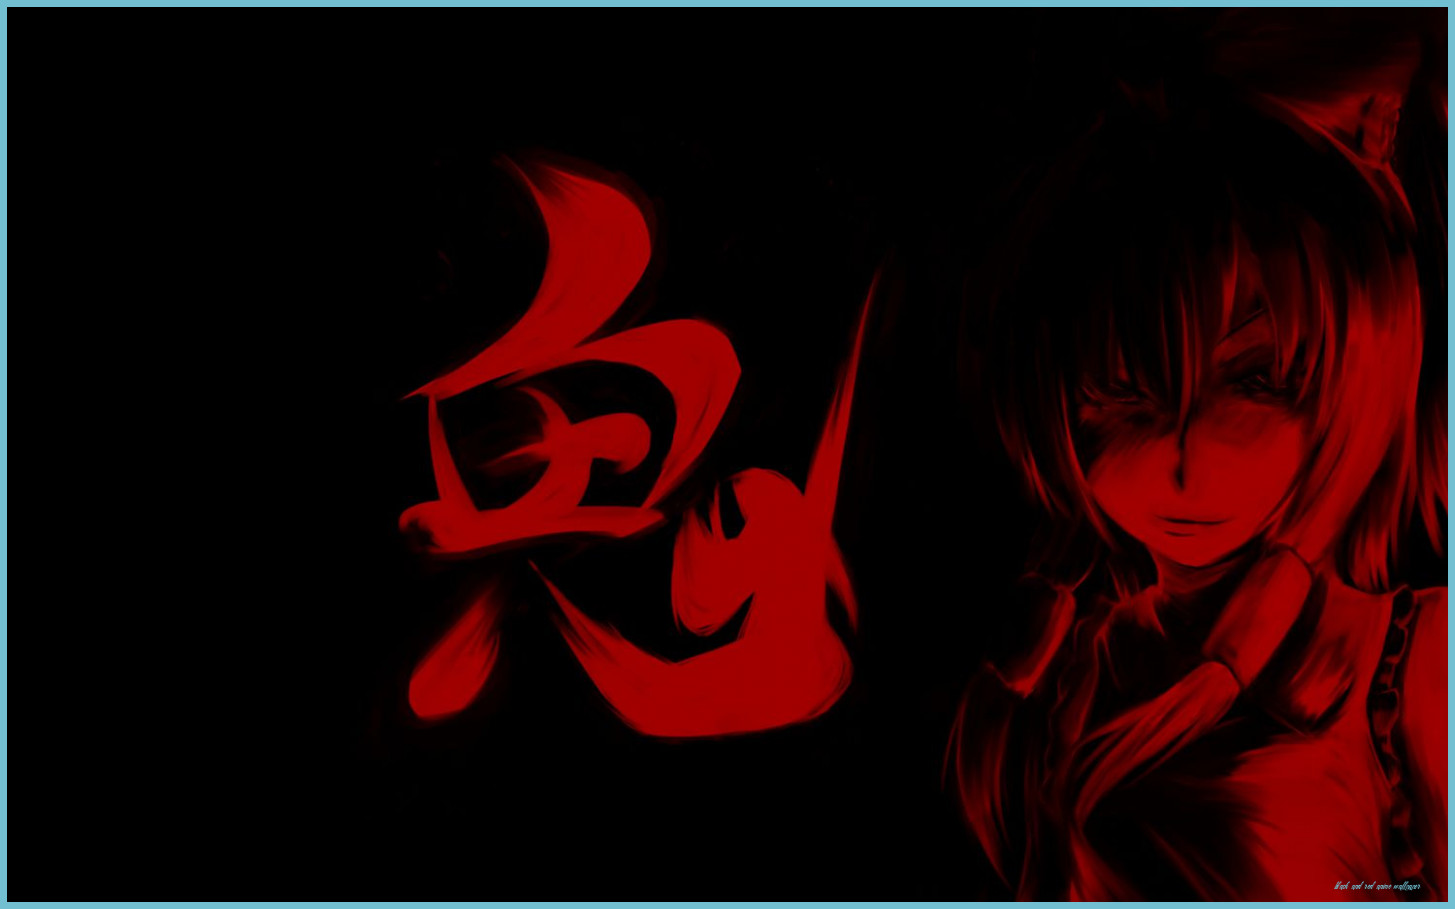 Dark Red Anime Wallpaper Free Dark Red Anime Background And Red Anime Wallpaper